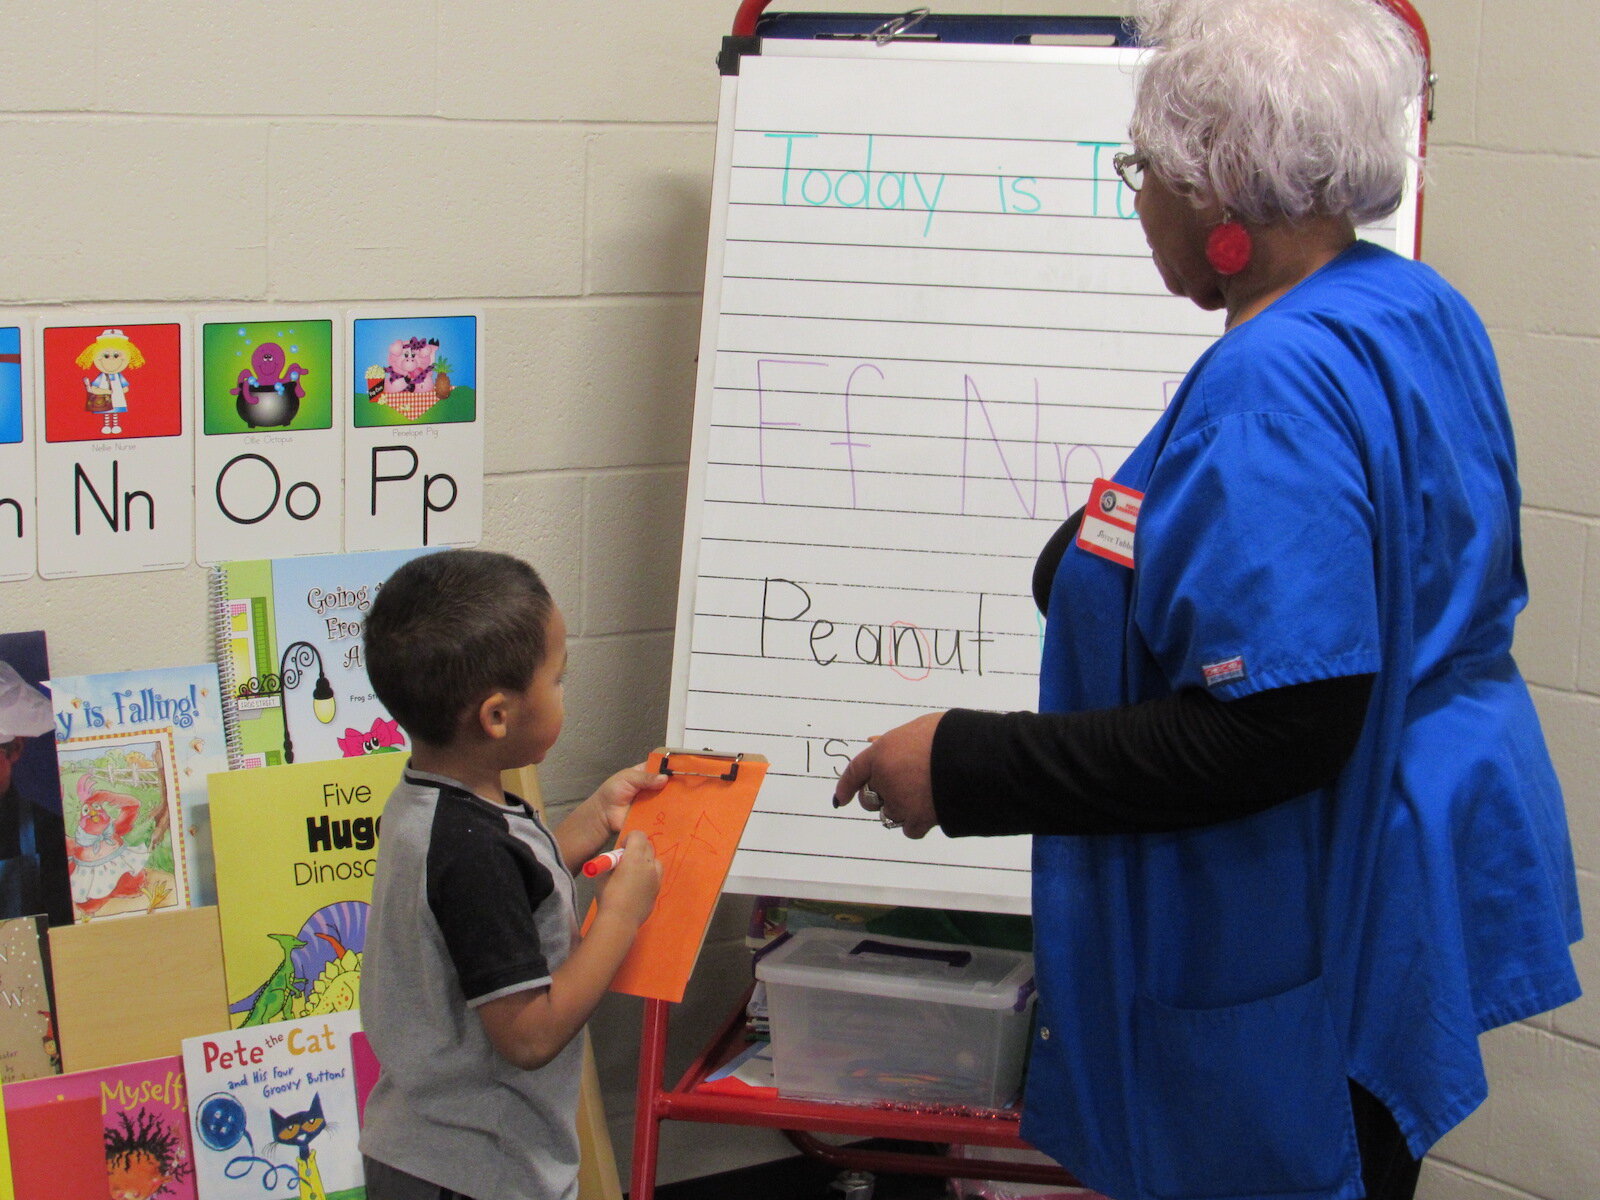 Joyce, a foster grandparent, works with preschoolers in their classroom.